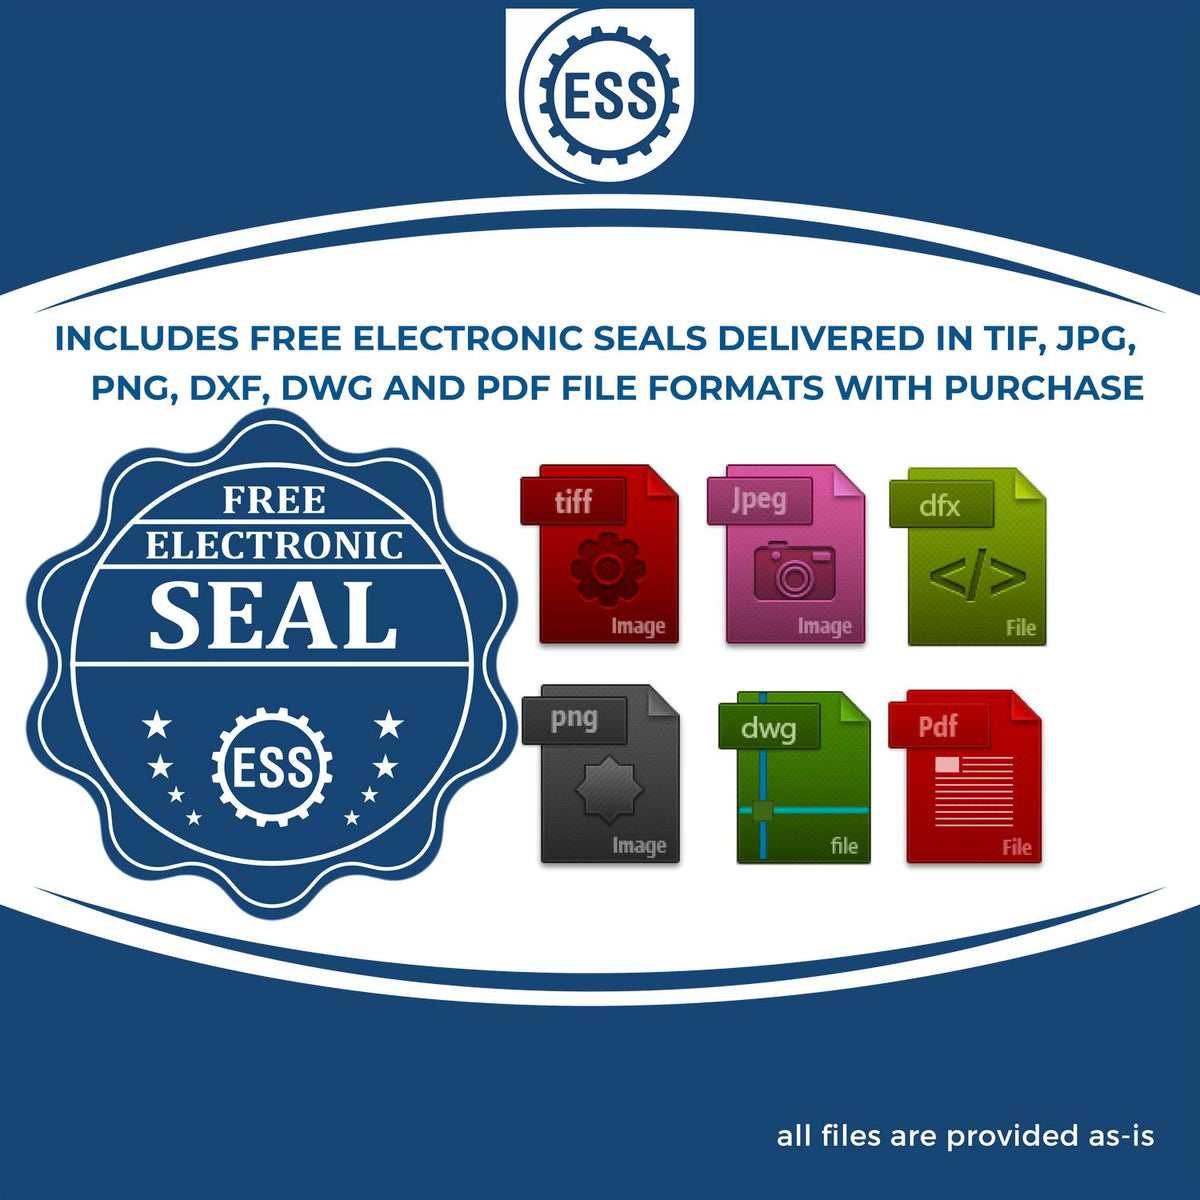 An infographic for the free electronic seal for the Gift California Engineer Seal illustrating the different file type icons such as DXF, DWG, TIF, JPG and PNG.